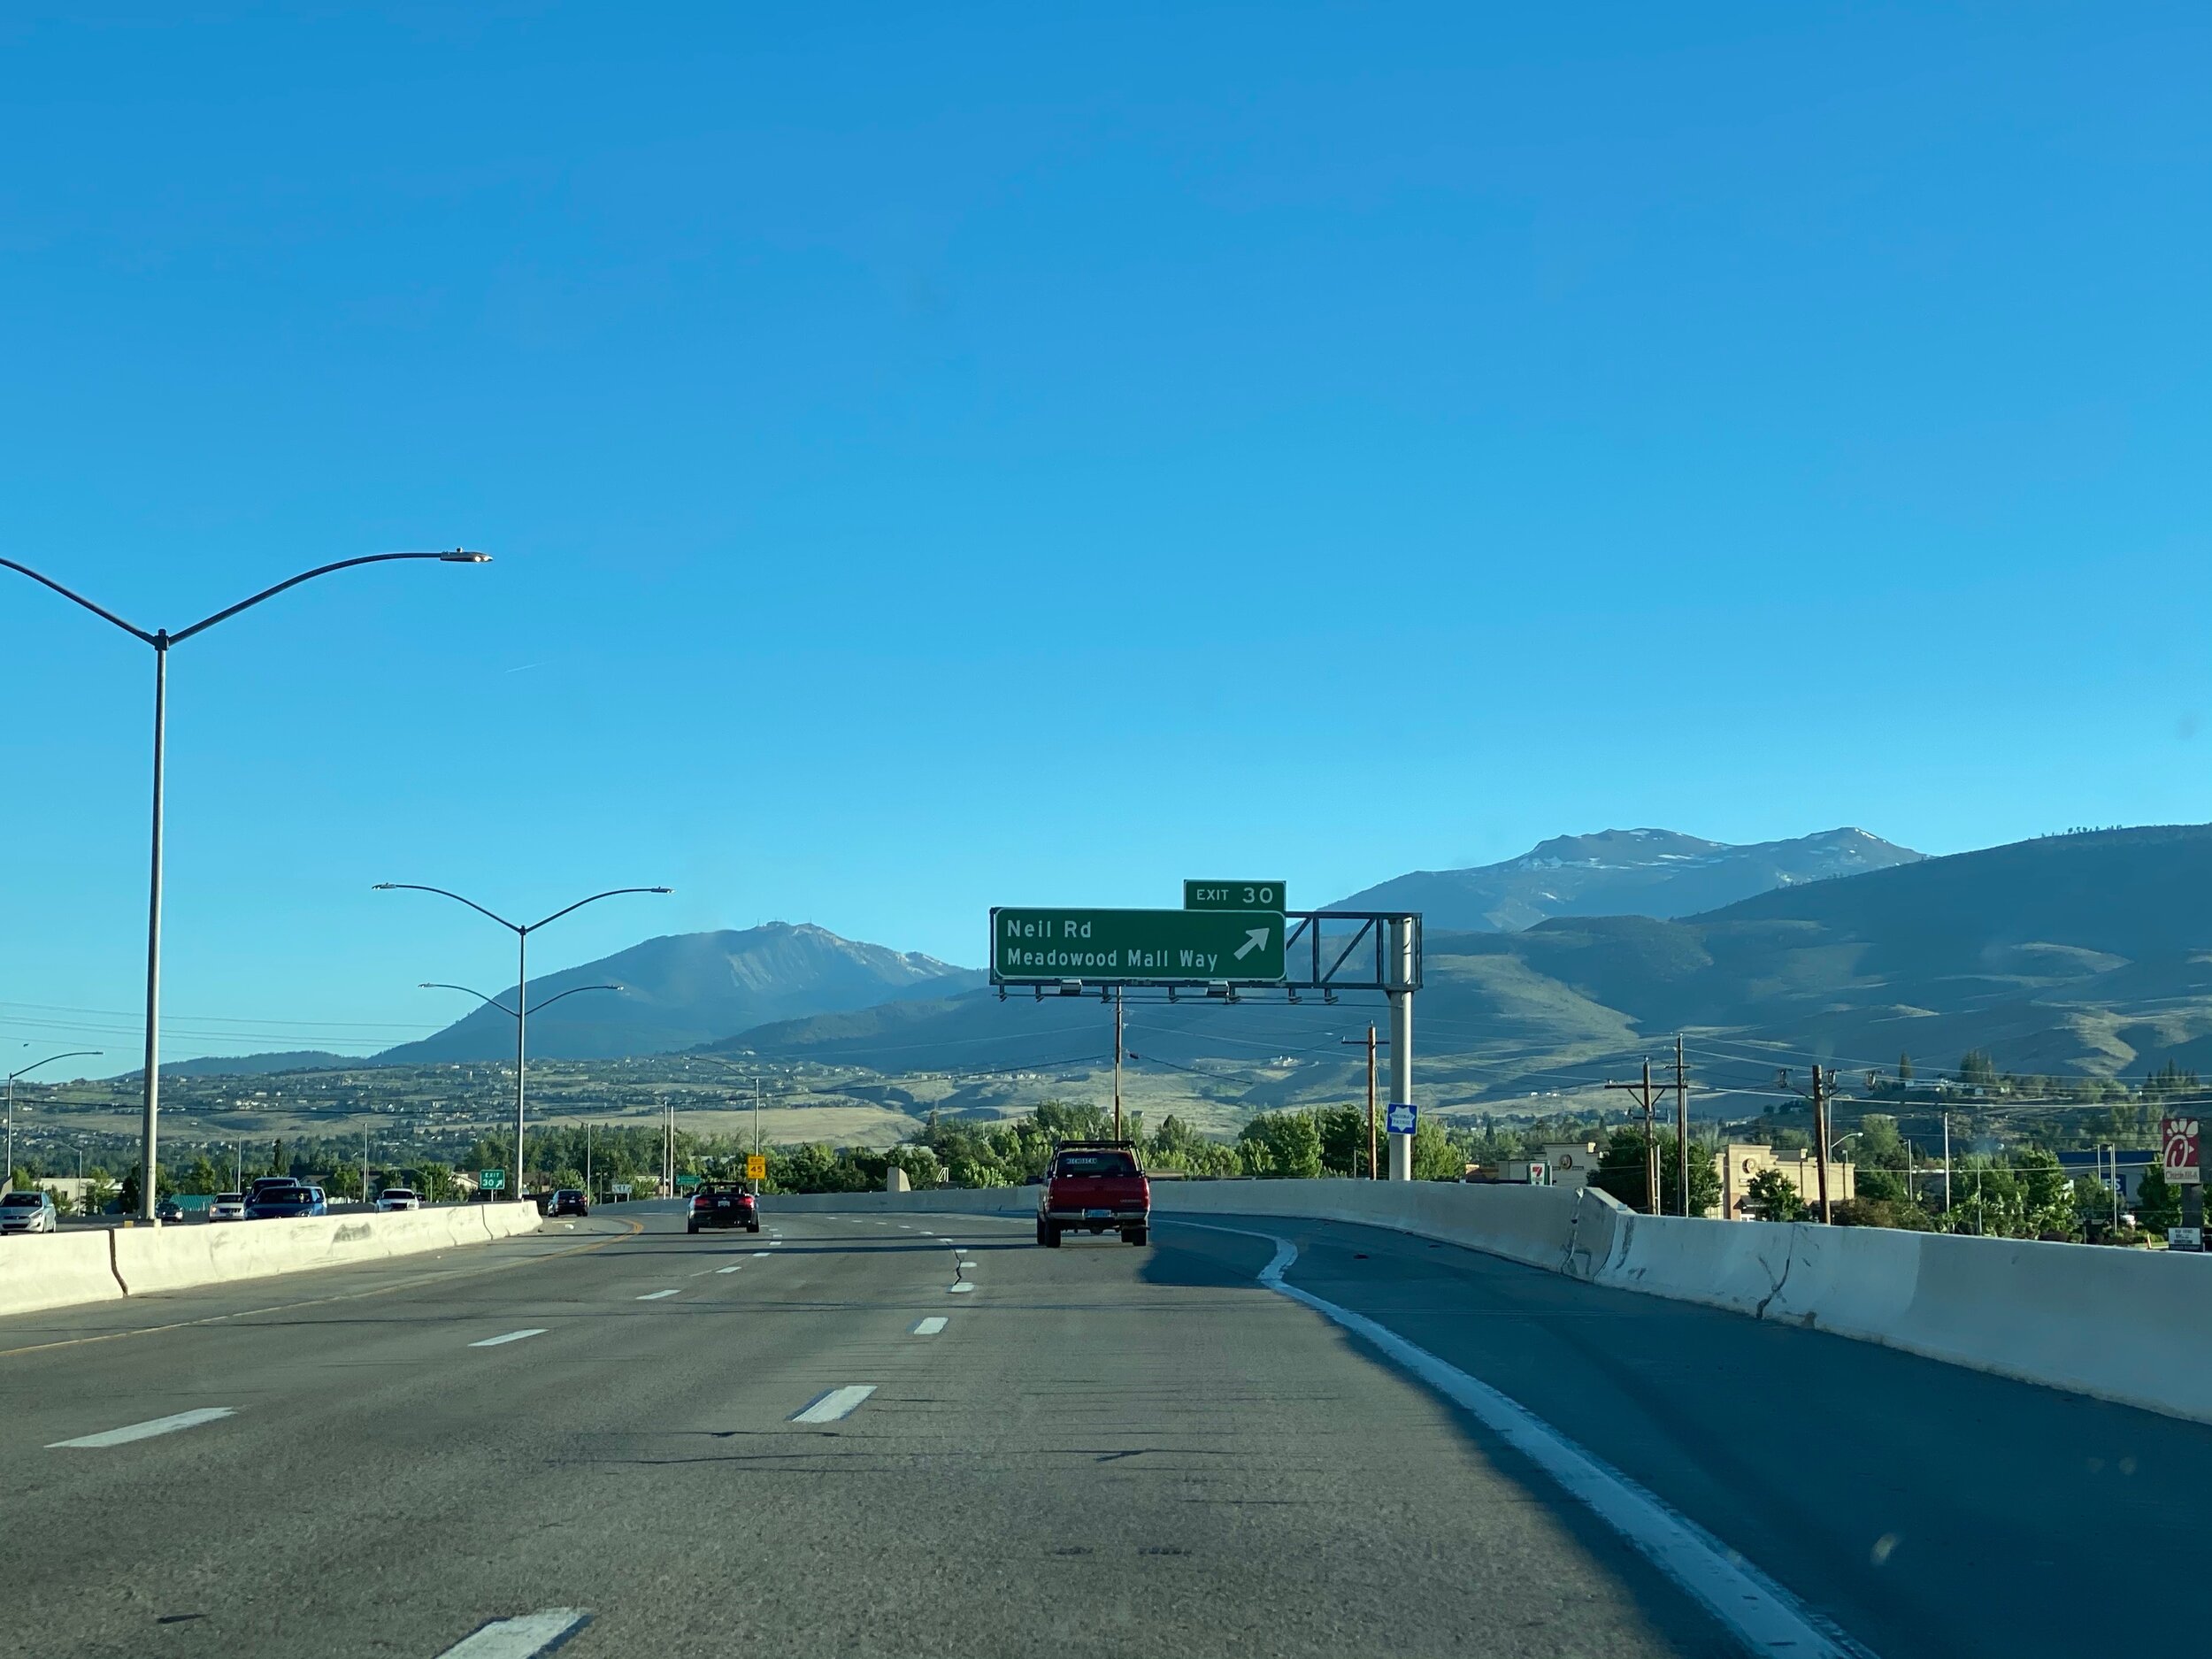 So, this was as we got into Reno.  Very pretty mountains in the background!  Photo by Karen Boudreaux, June 4, 2021